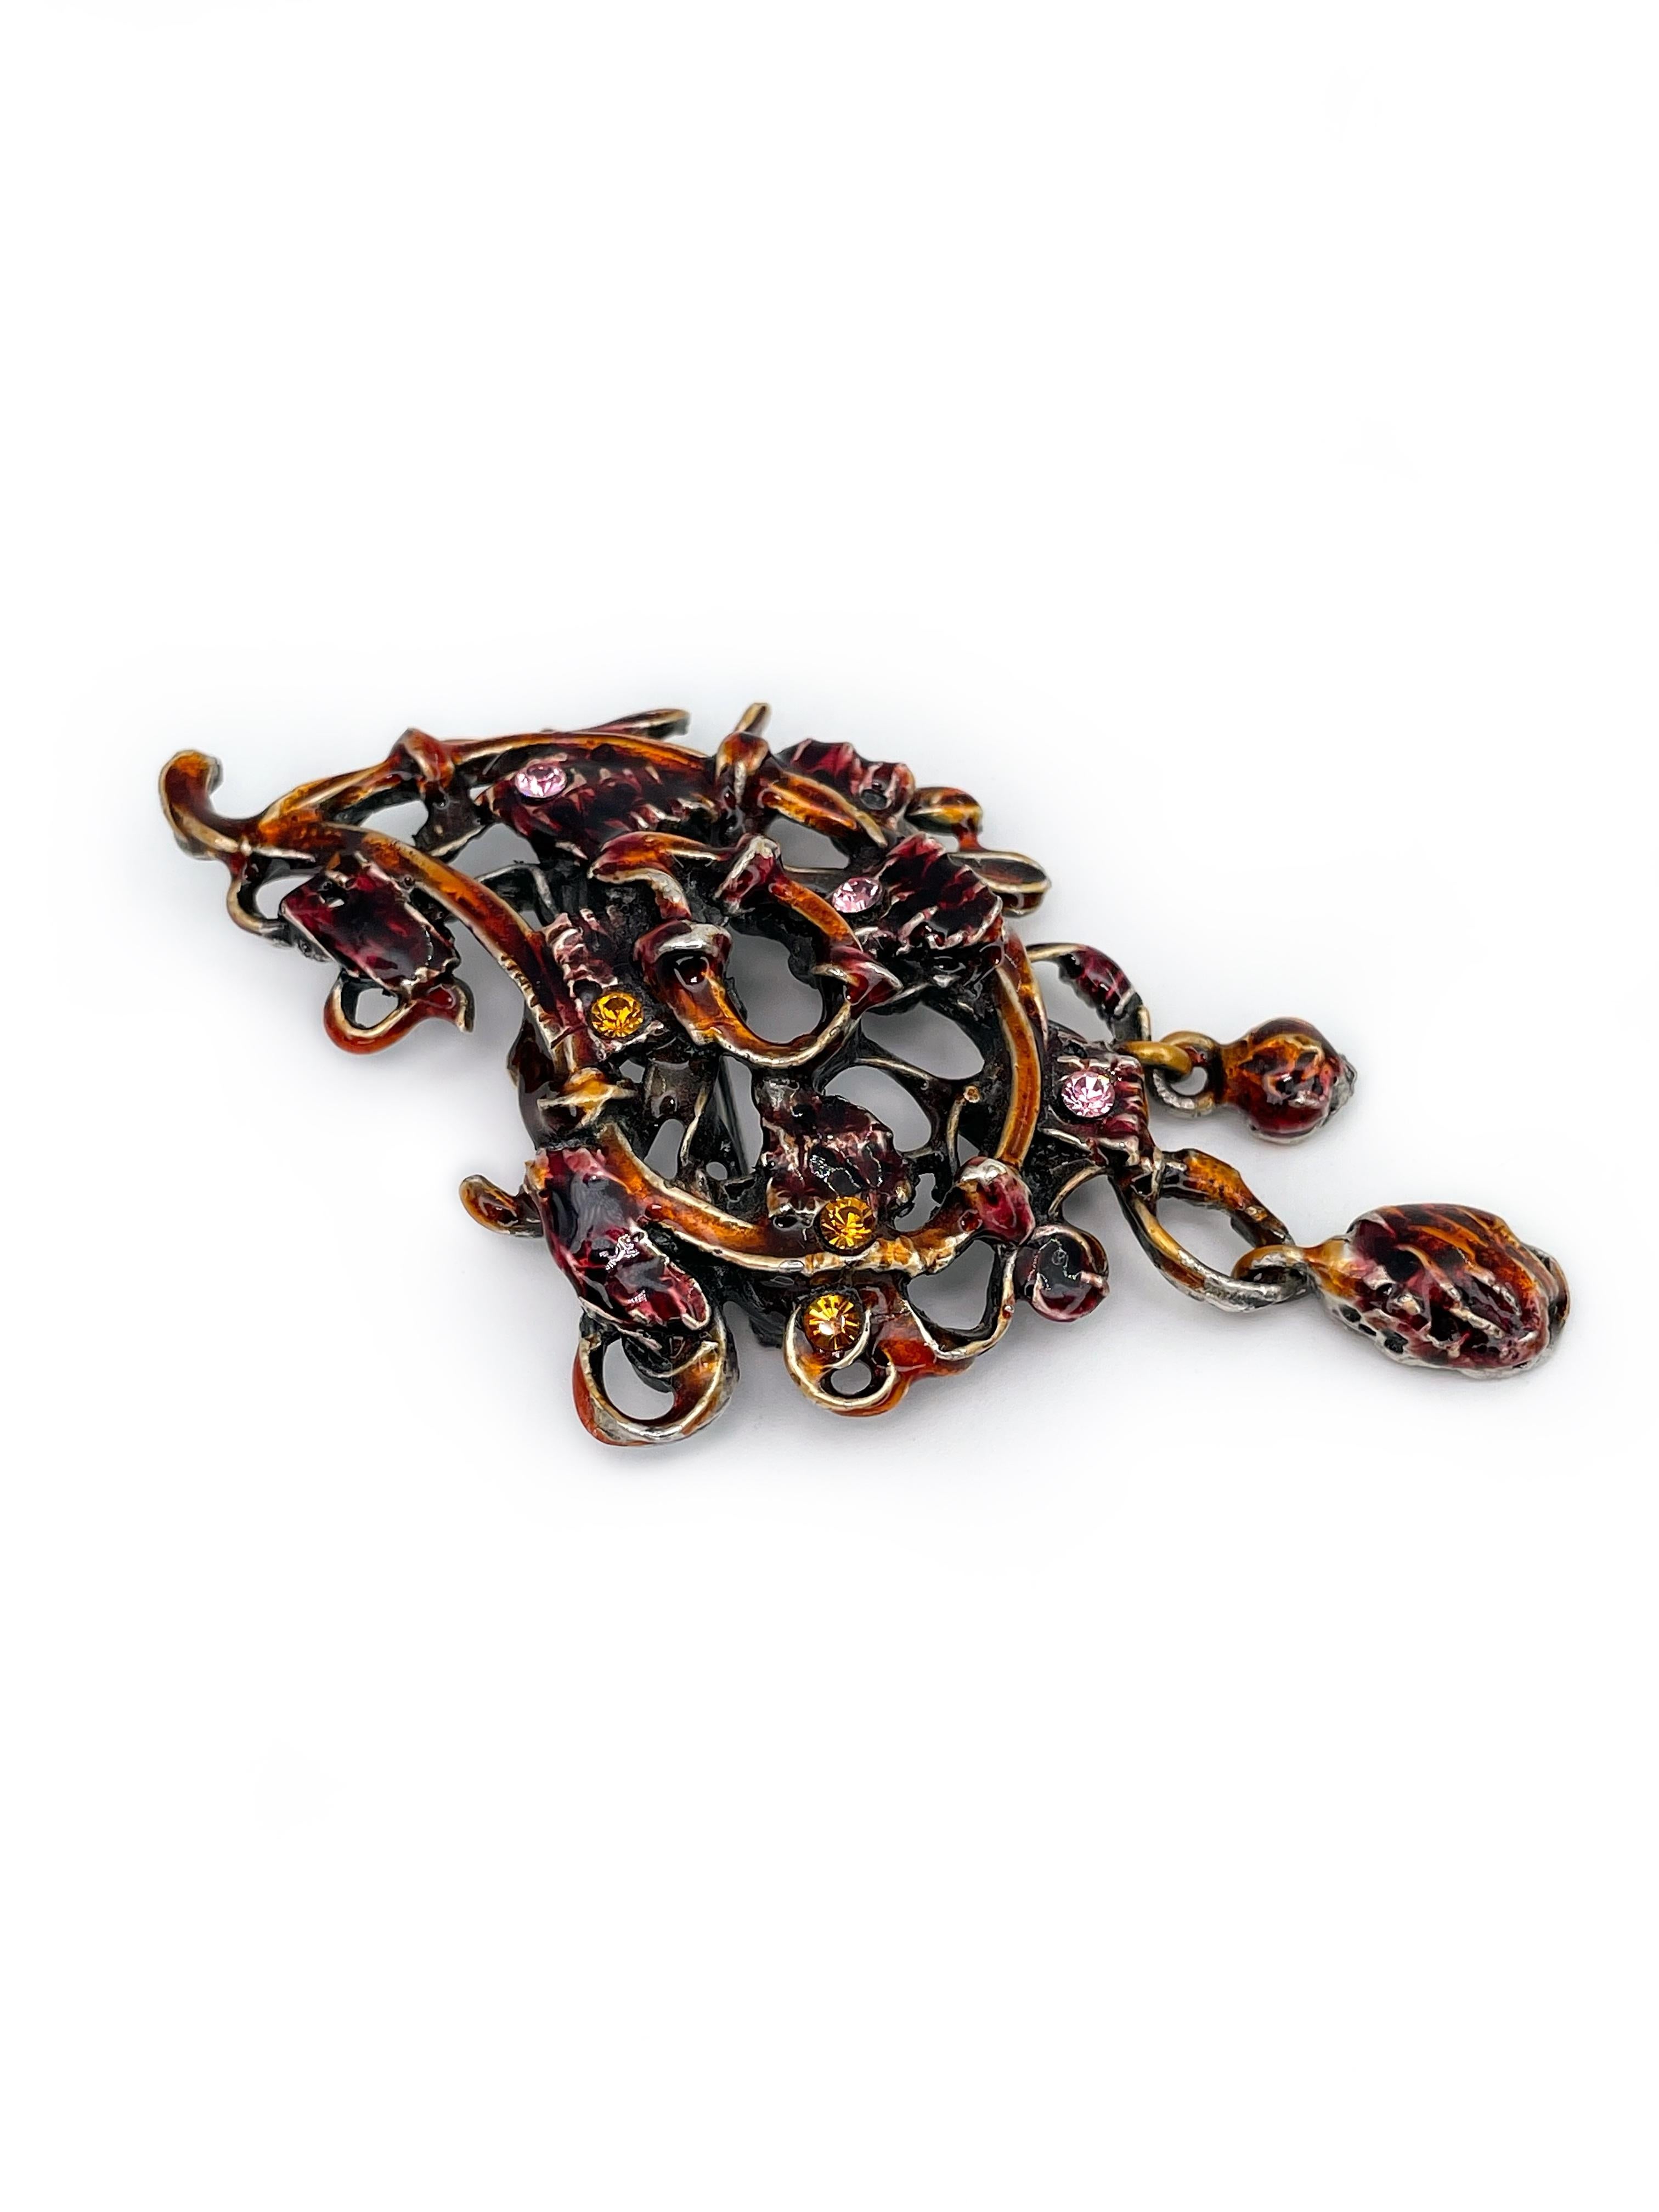 This is an intricate openwork pin brooch designed by Christian Lacroix in 1990’s. Silvered metal is covered with red and orange enamel. The piece features tiny orange and pink rhinestones. It has  dangling charms. 

Signed: “Christian Lacroix - CL -